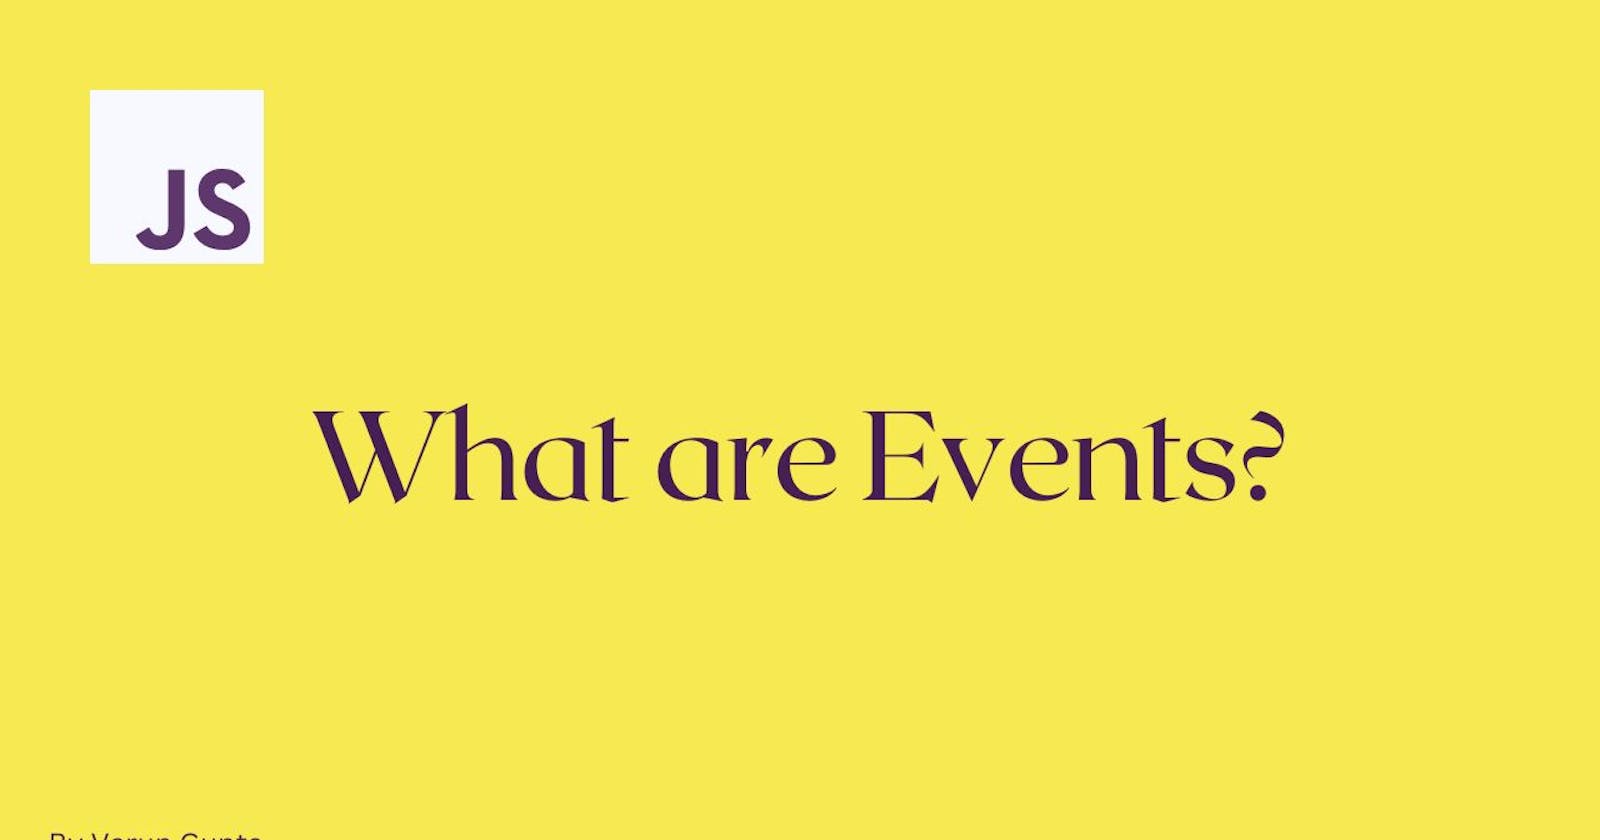 Events in JS